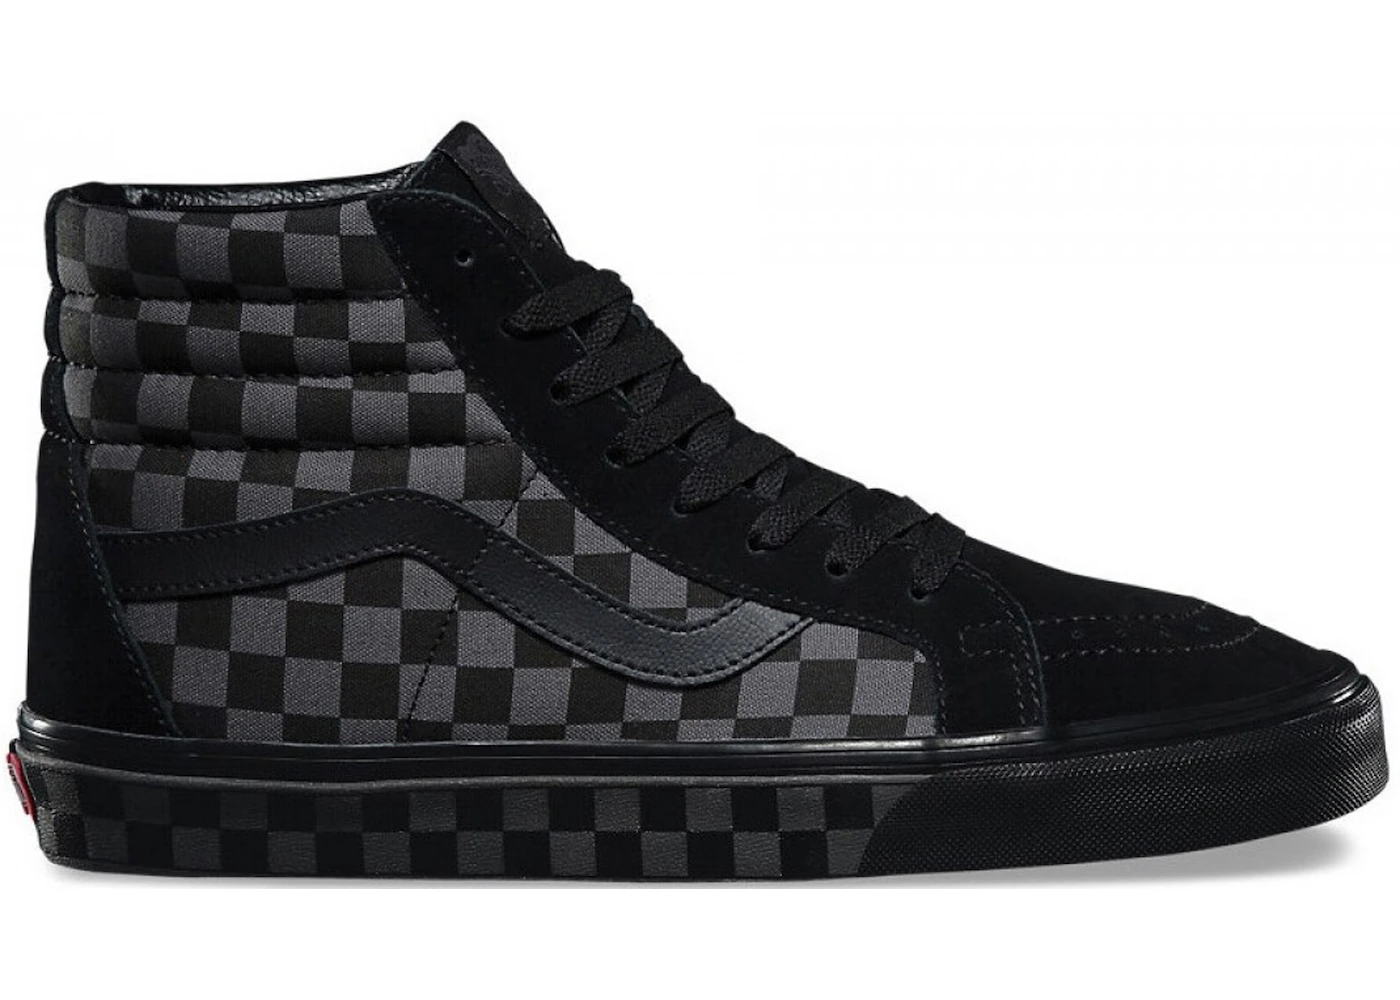 Ananiver court camouflage Vans Sk8-Hi Checkerboard Black Pewter - VN0A2XSBQX2 - US